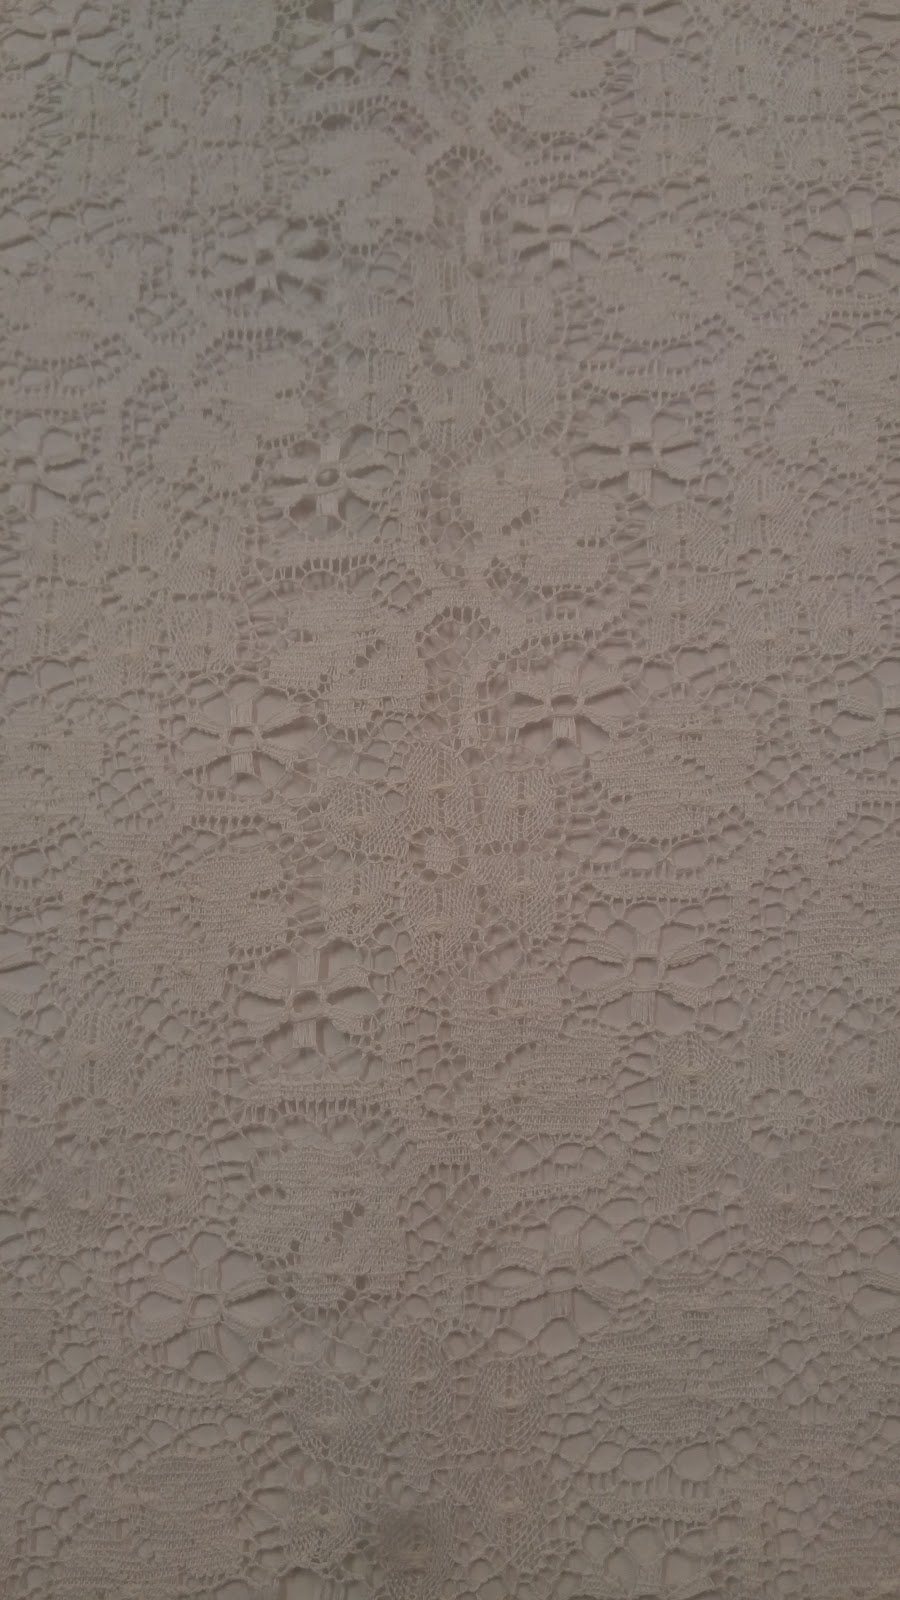 Jeannies Bridal Lace Fabric | 2520 S Powerline Rd, Nampa, ID 83686 | Phone: (208) 466-2175